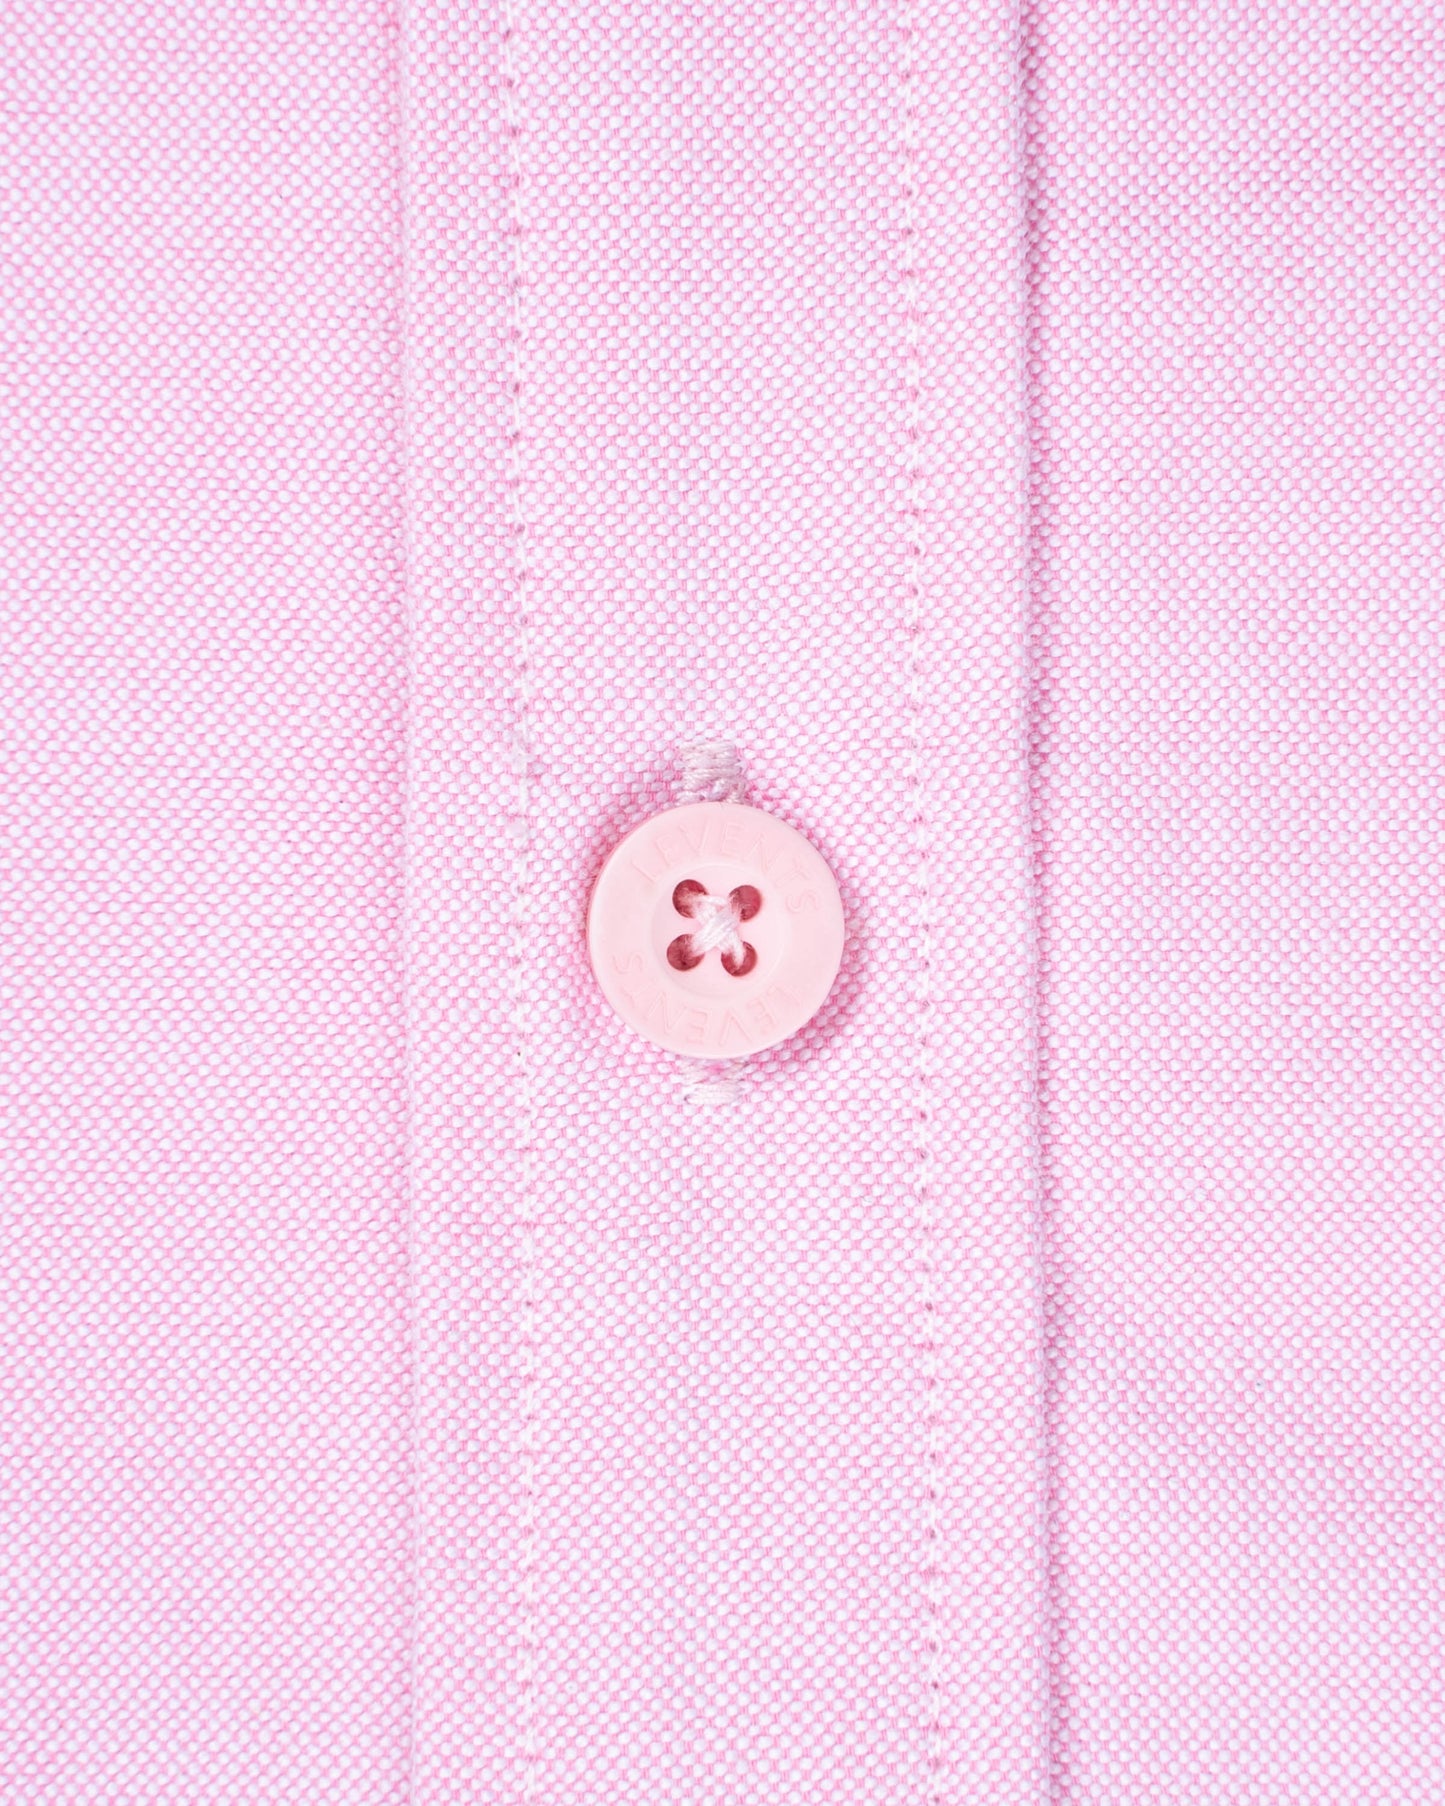 Levents® Classic Long Sleeve Shirt/ Pink